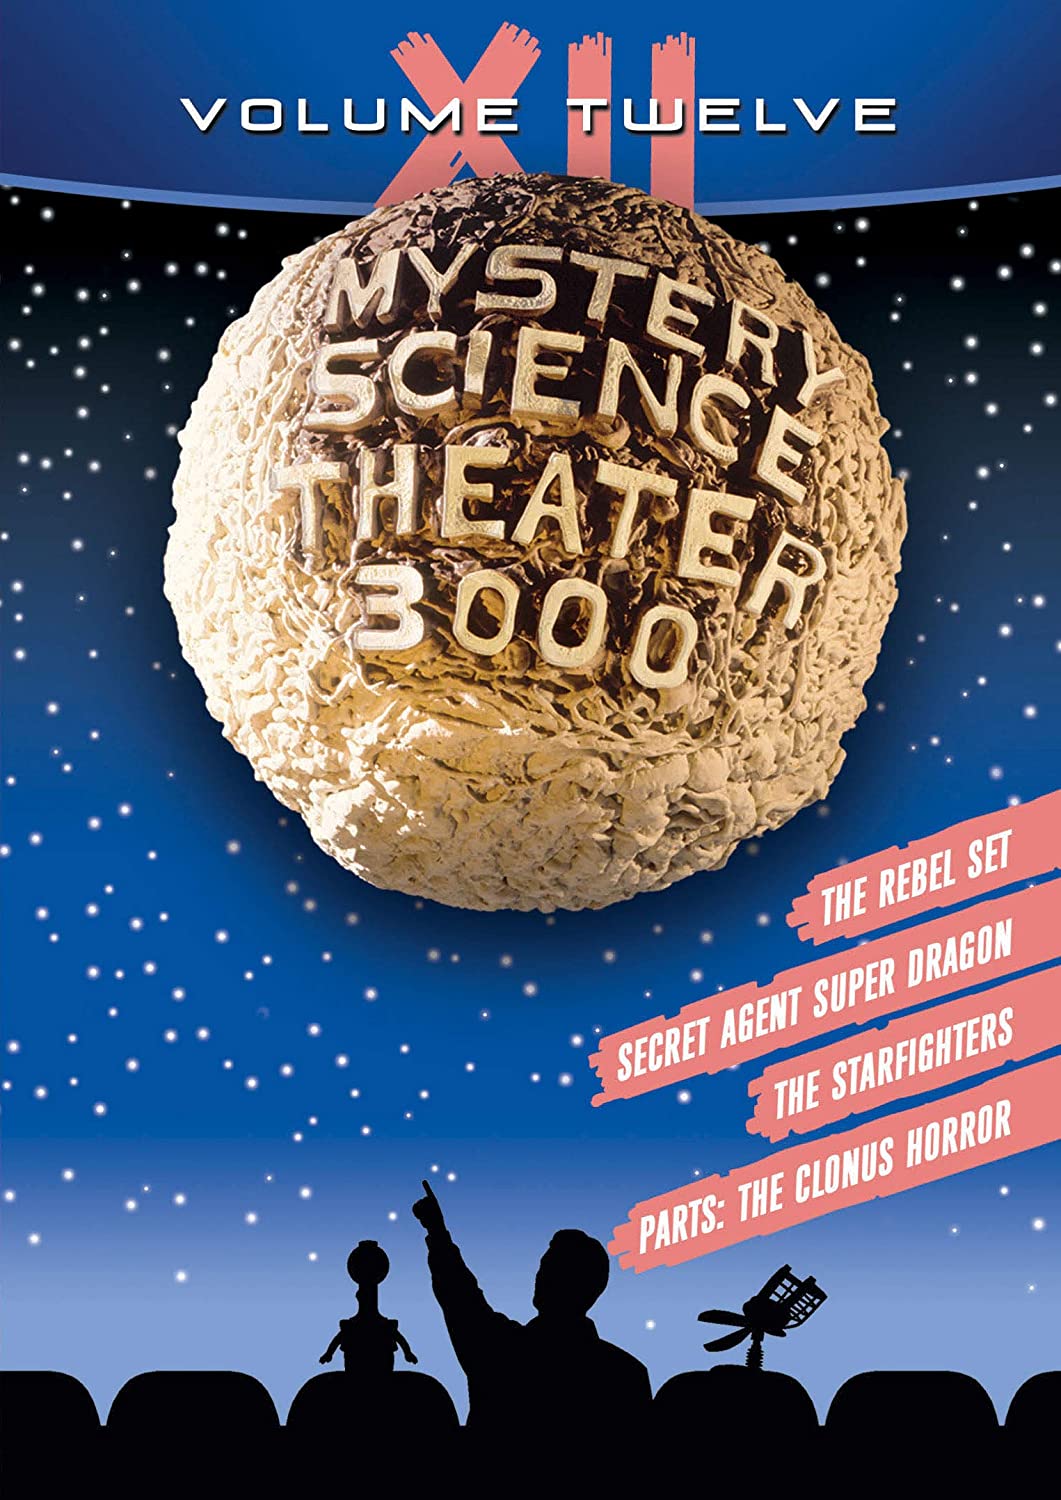 Mystery Science Theater 3000: Vol. XII DVD - Corvus: Clothing and Curiosities